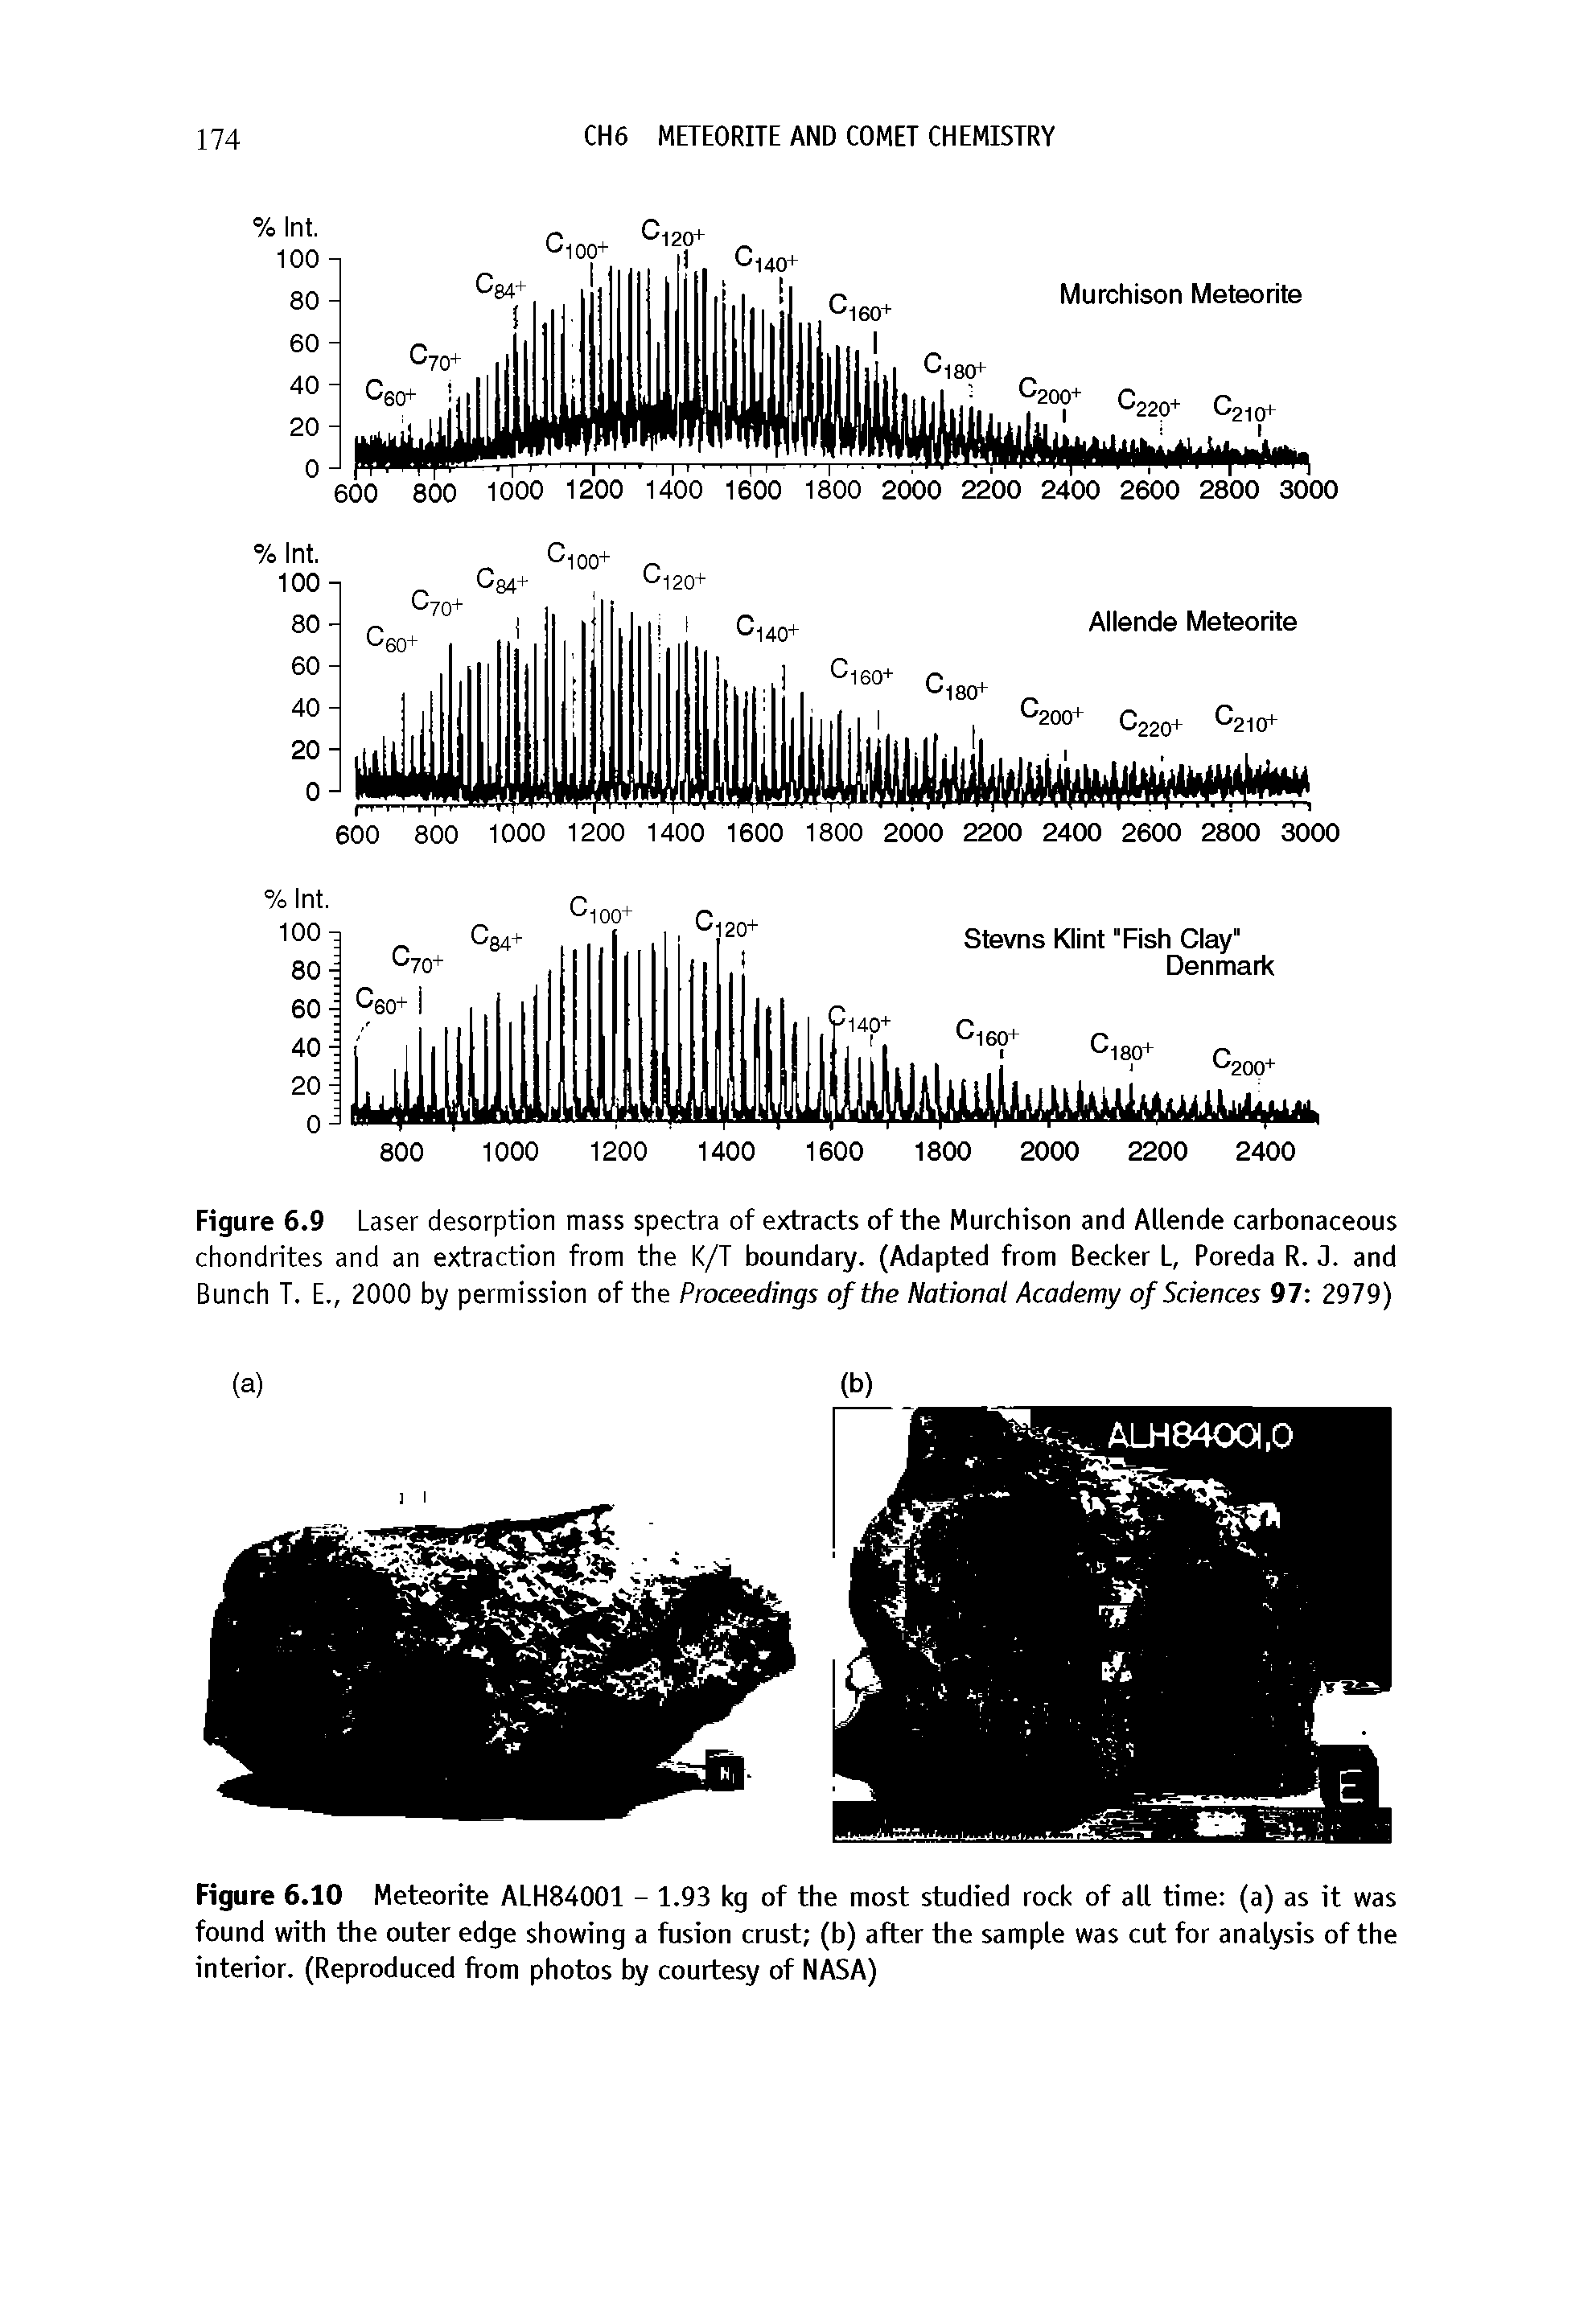 Figure 6.10 Meteorite ALH84001 - 1.93 kg of the most studied rock of all time (a) as it was found with the outer edge showing a fusion crust (b) after the sample was cut for analysis of the interior. (Reproduced from photos by courtesy of NASA)...